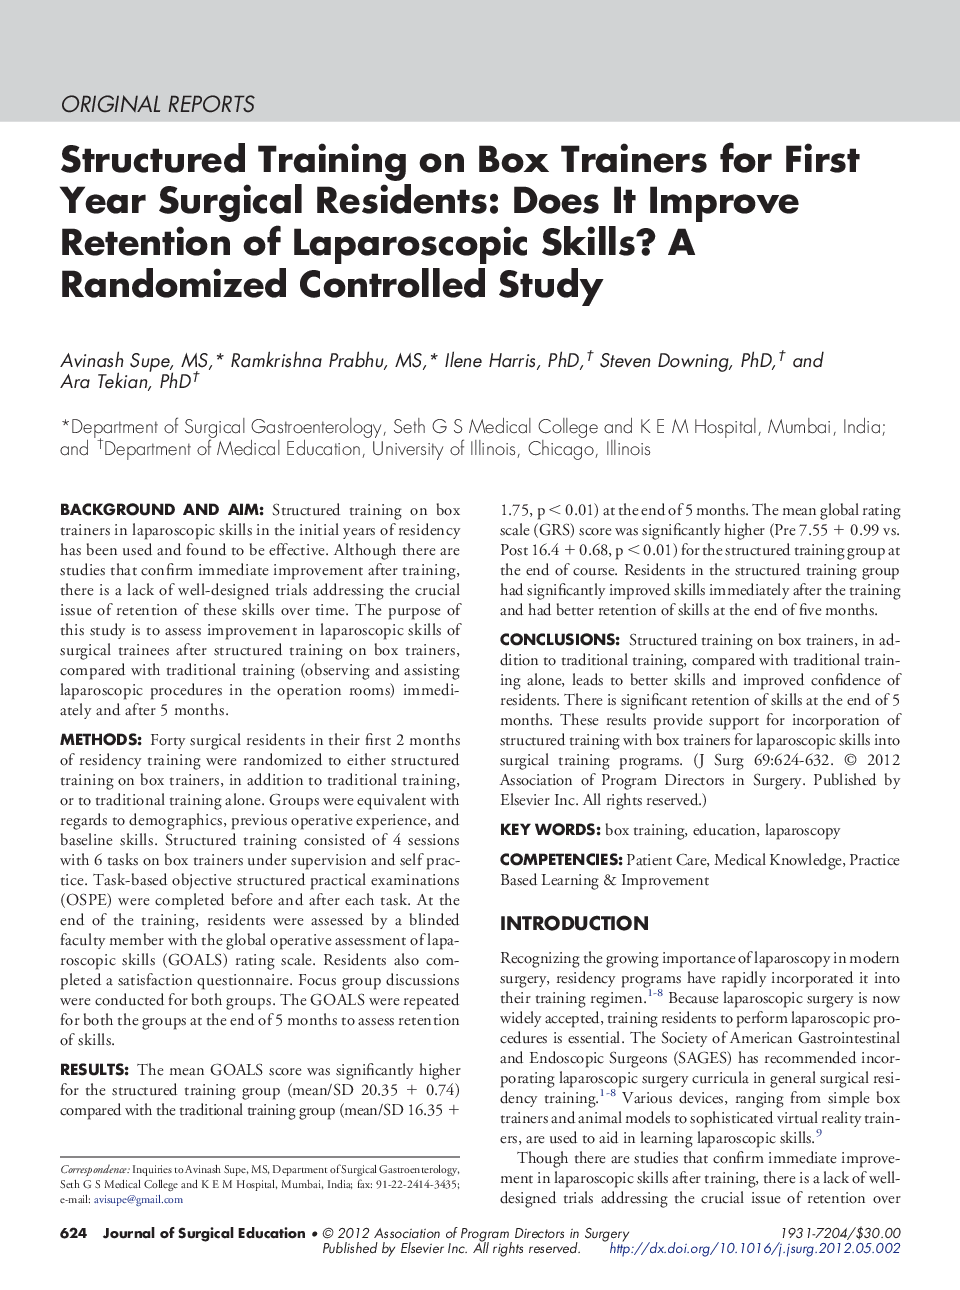 Structured Training on Box Trainers for First Year Surgical Residents: Does It Improve Retention of Laparoscopic Skills? A Randomized Controlled Study